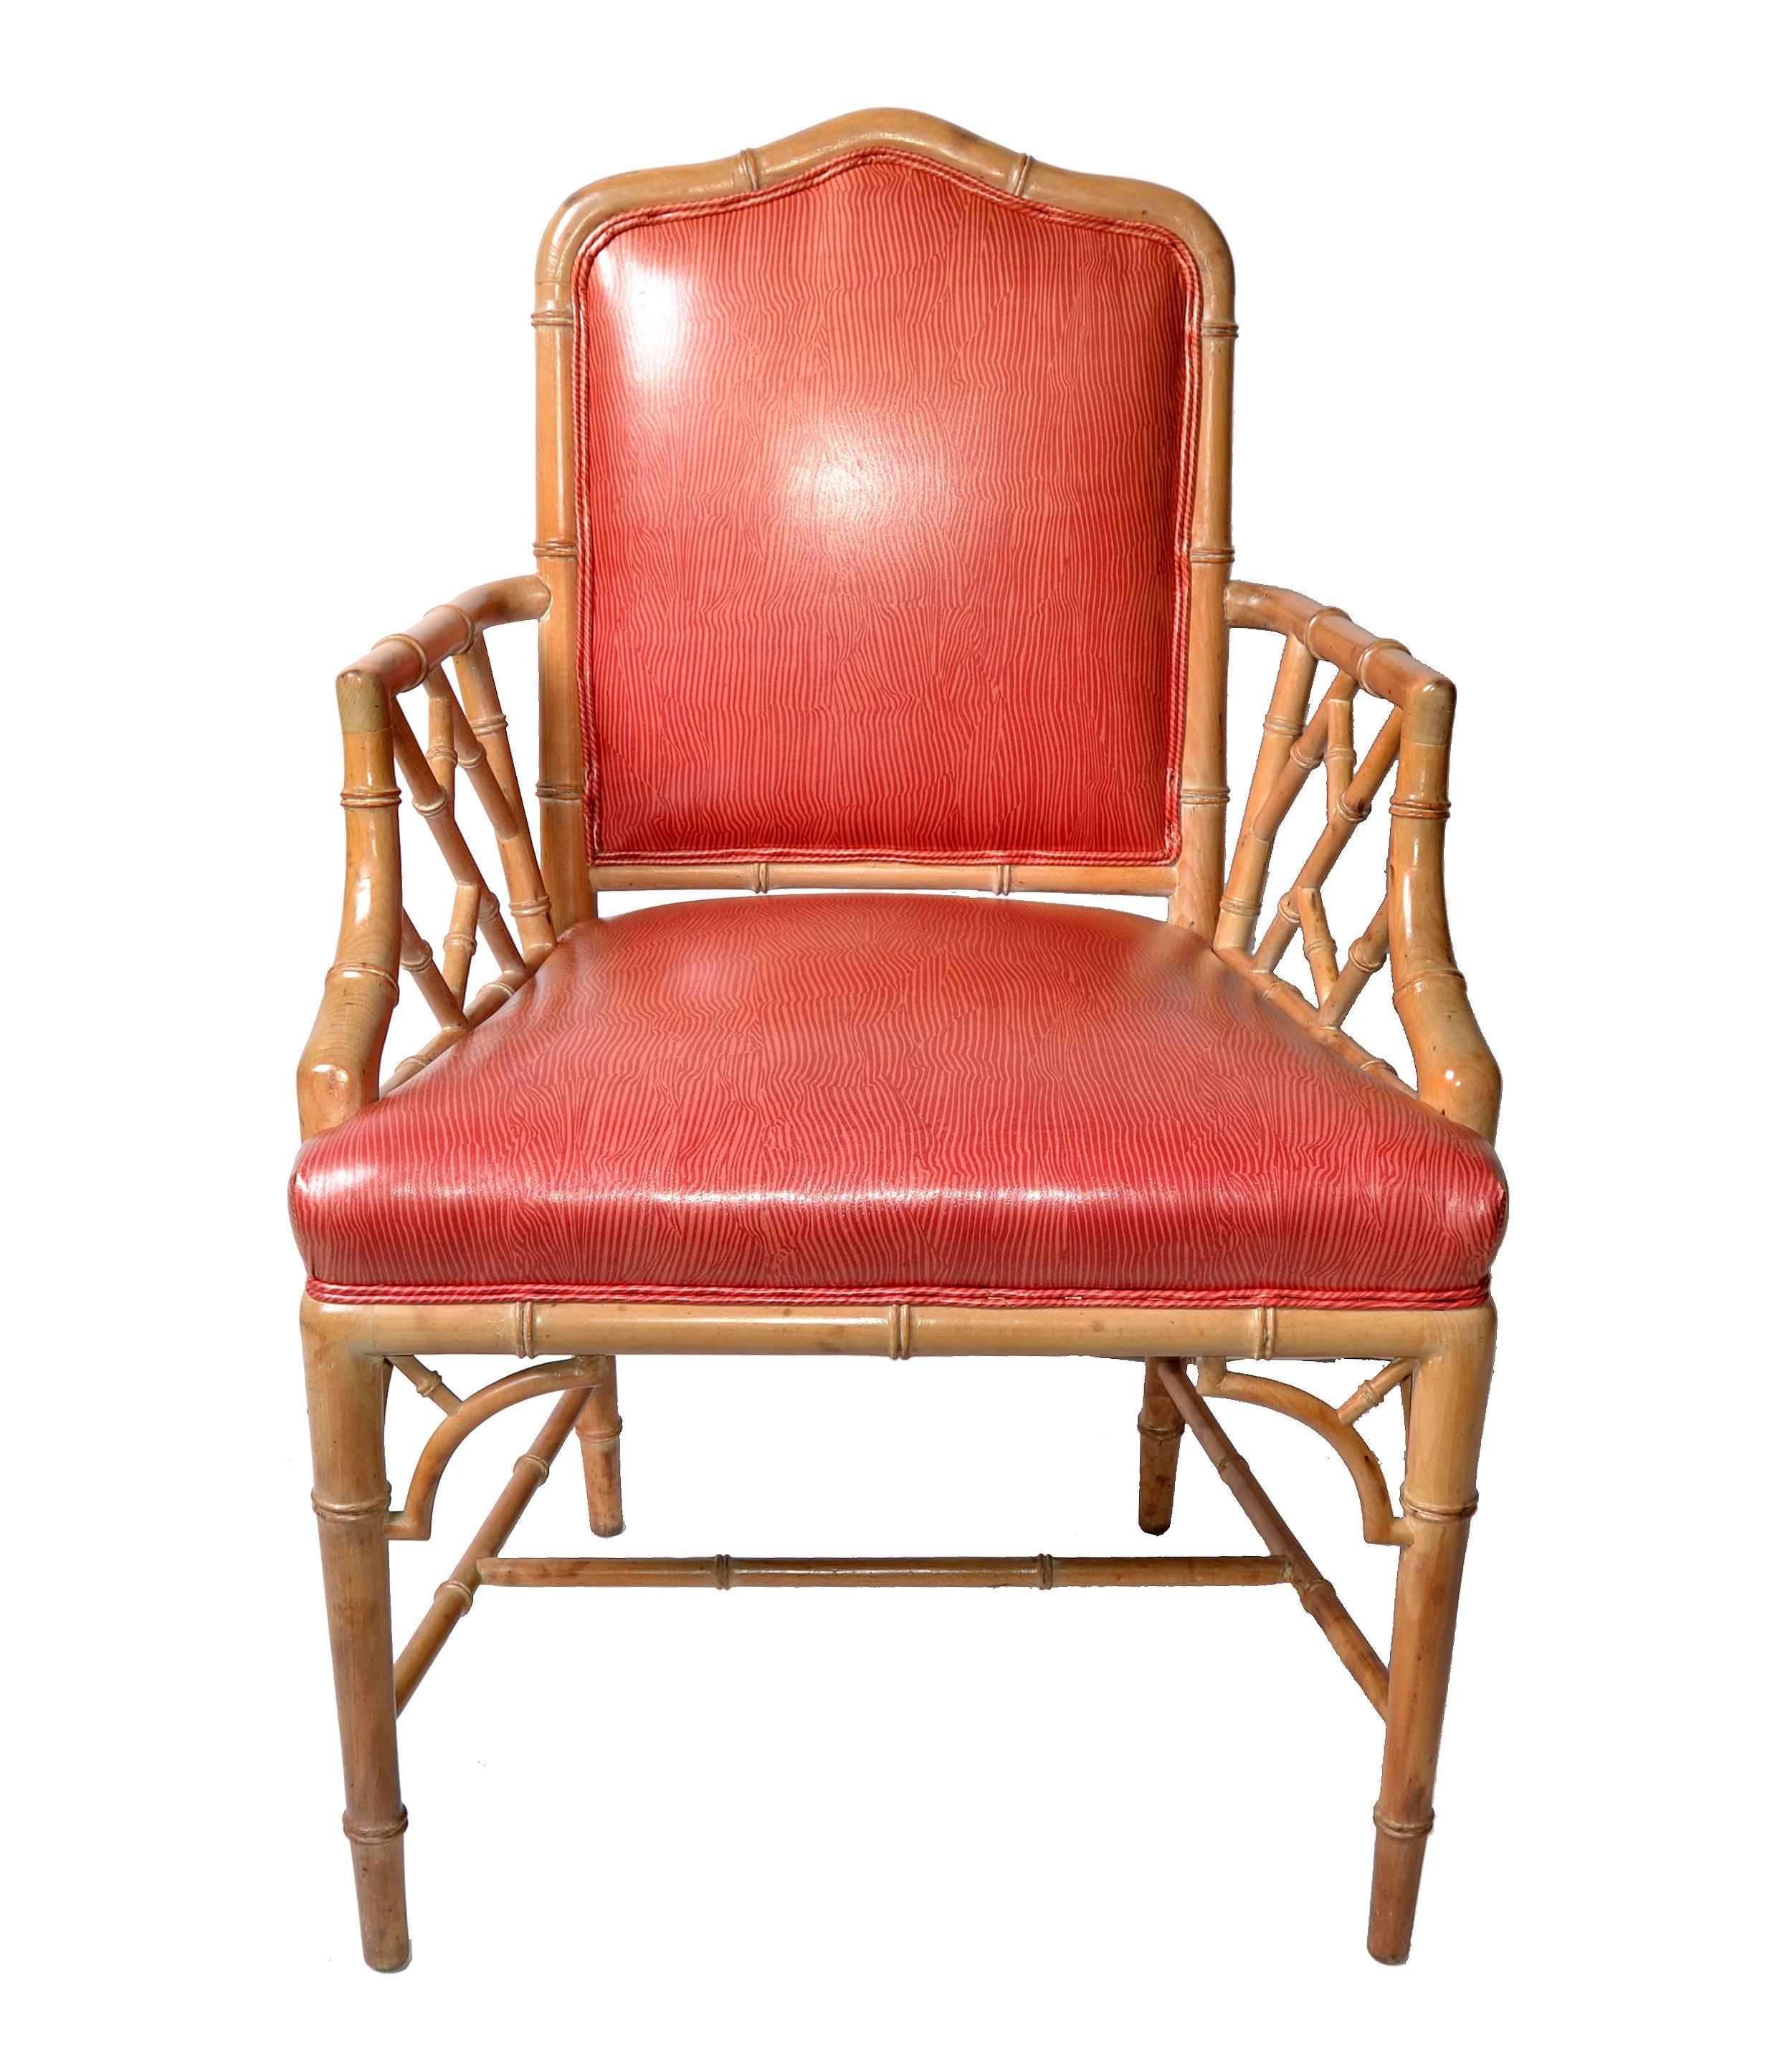 Set of eight faux bamboo Chinese Chippendale chairs in vinyl upholstery. There are six side chairs and two armchairs 
The chairs are firm, sturdy and very comfortable as the seats and backs are padded.
They are from the late 1950s and in good